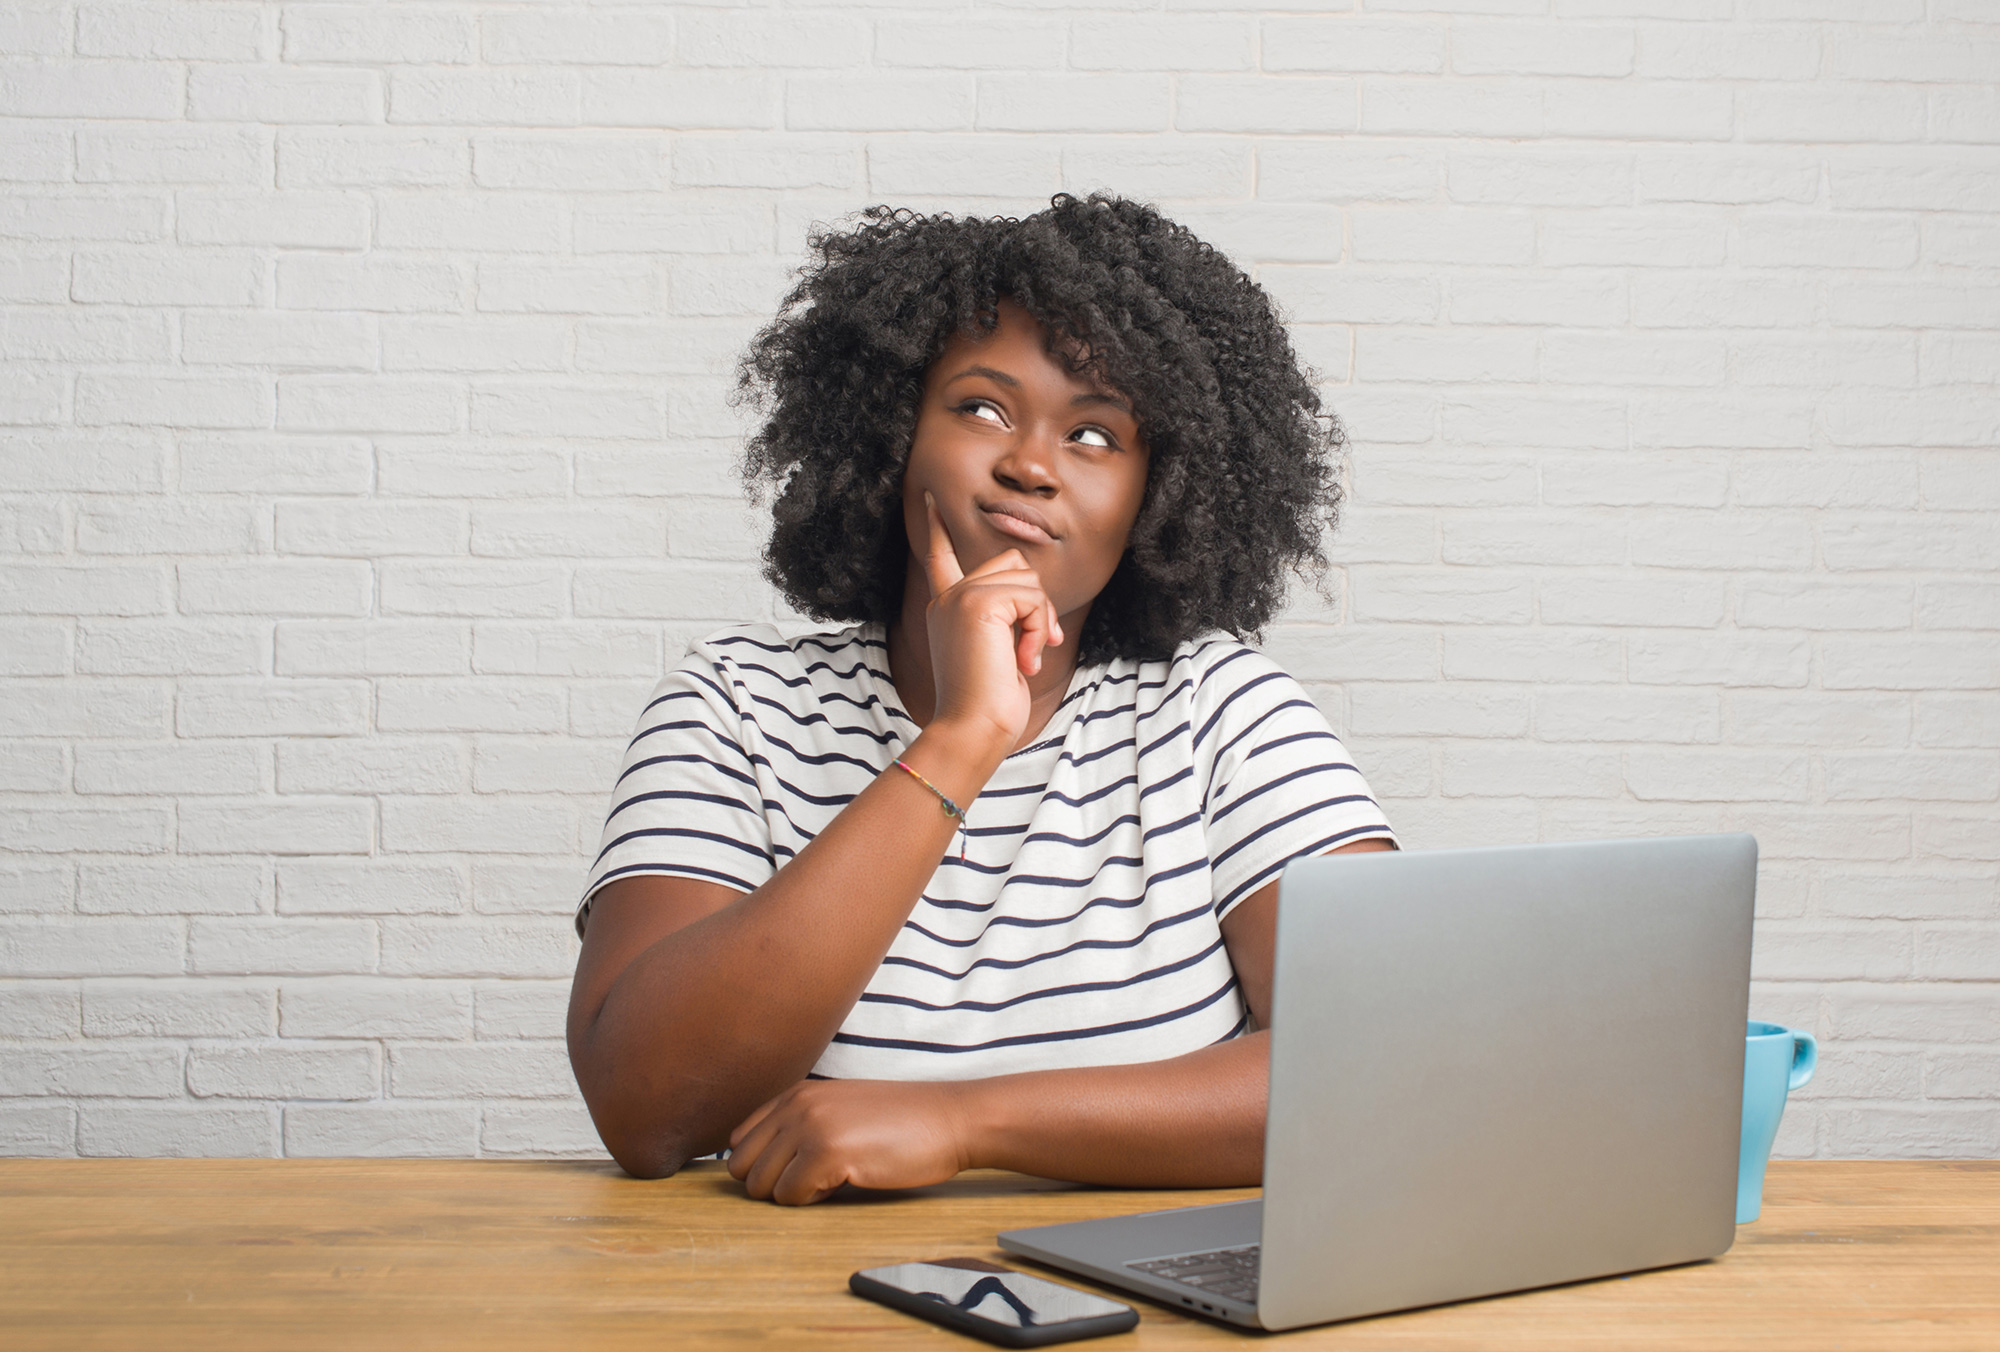 A woman makes a quizzical expression while sitting in front of an open laptop.